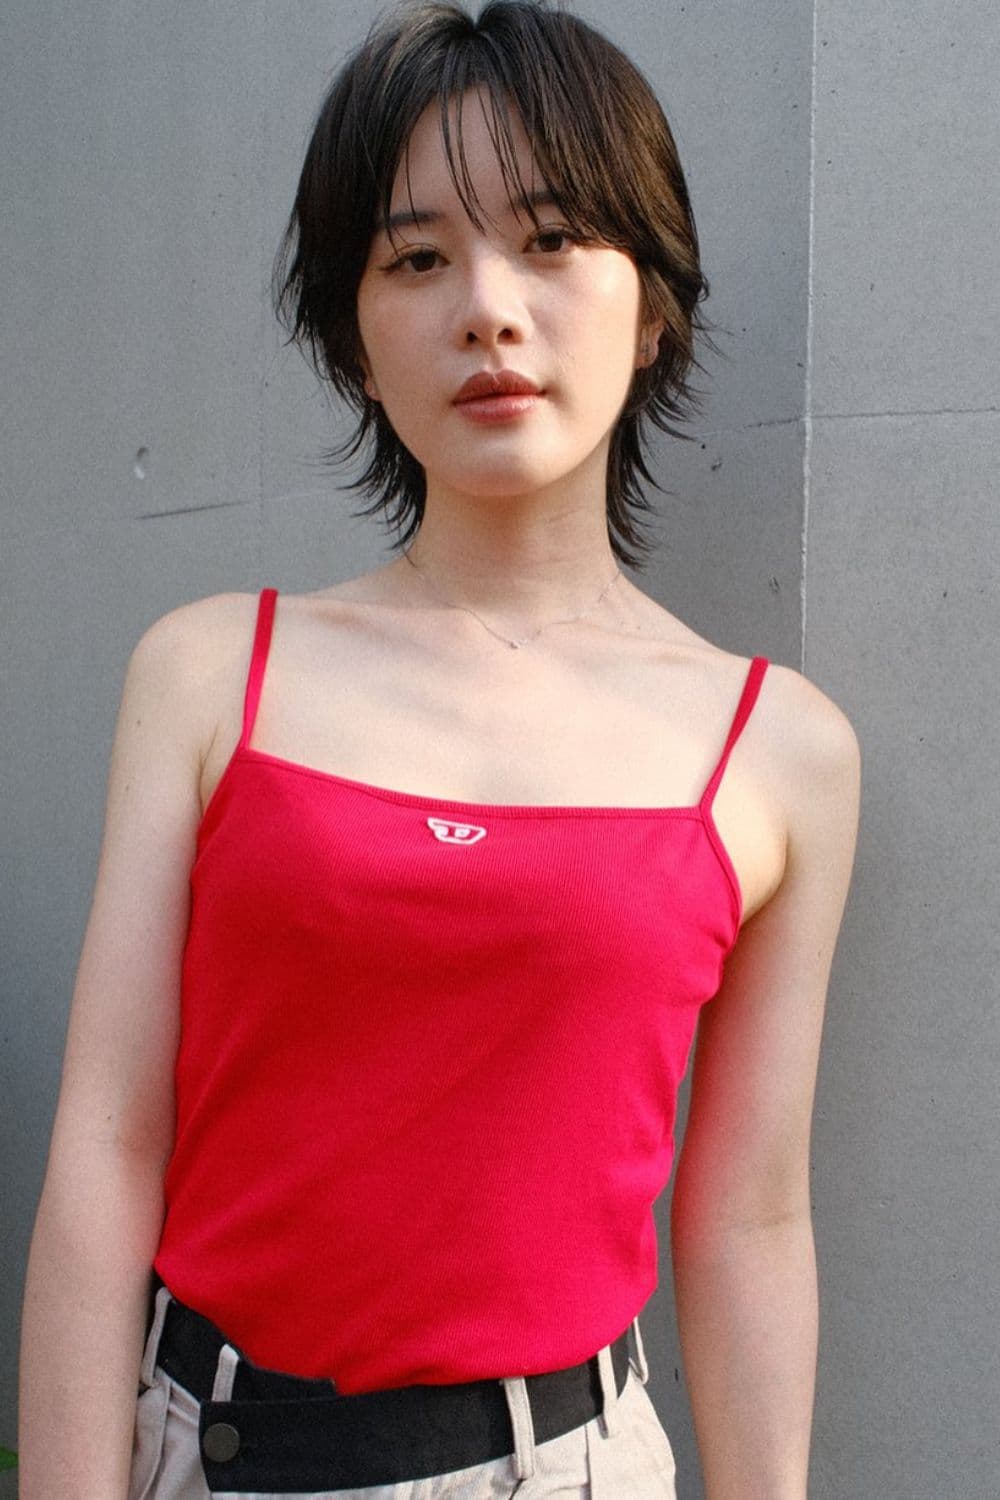 A woman wearing a red tank top with a classic short wolf cut.